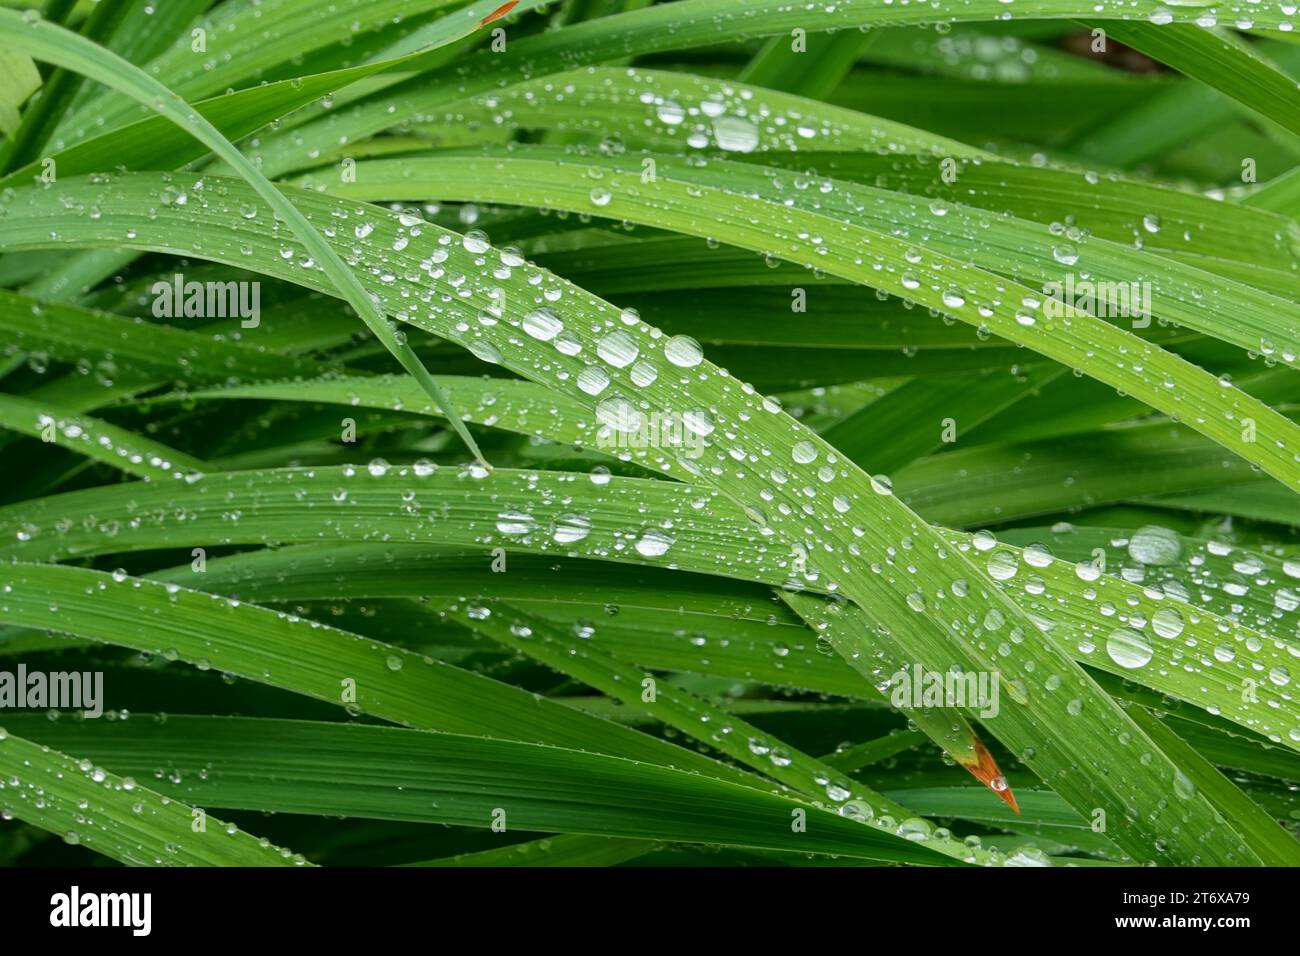 Water droplets on leaves Stock Photo